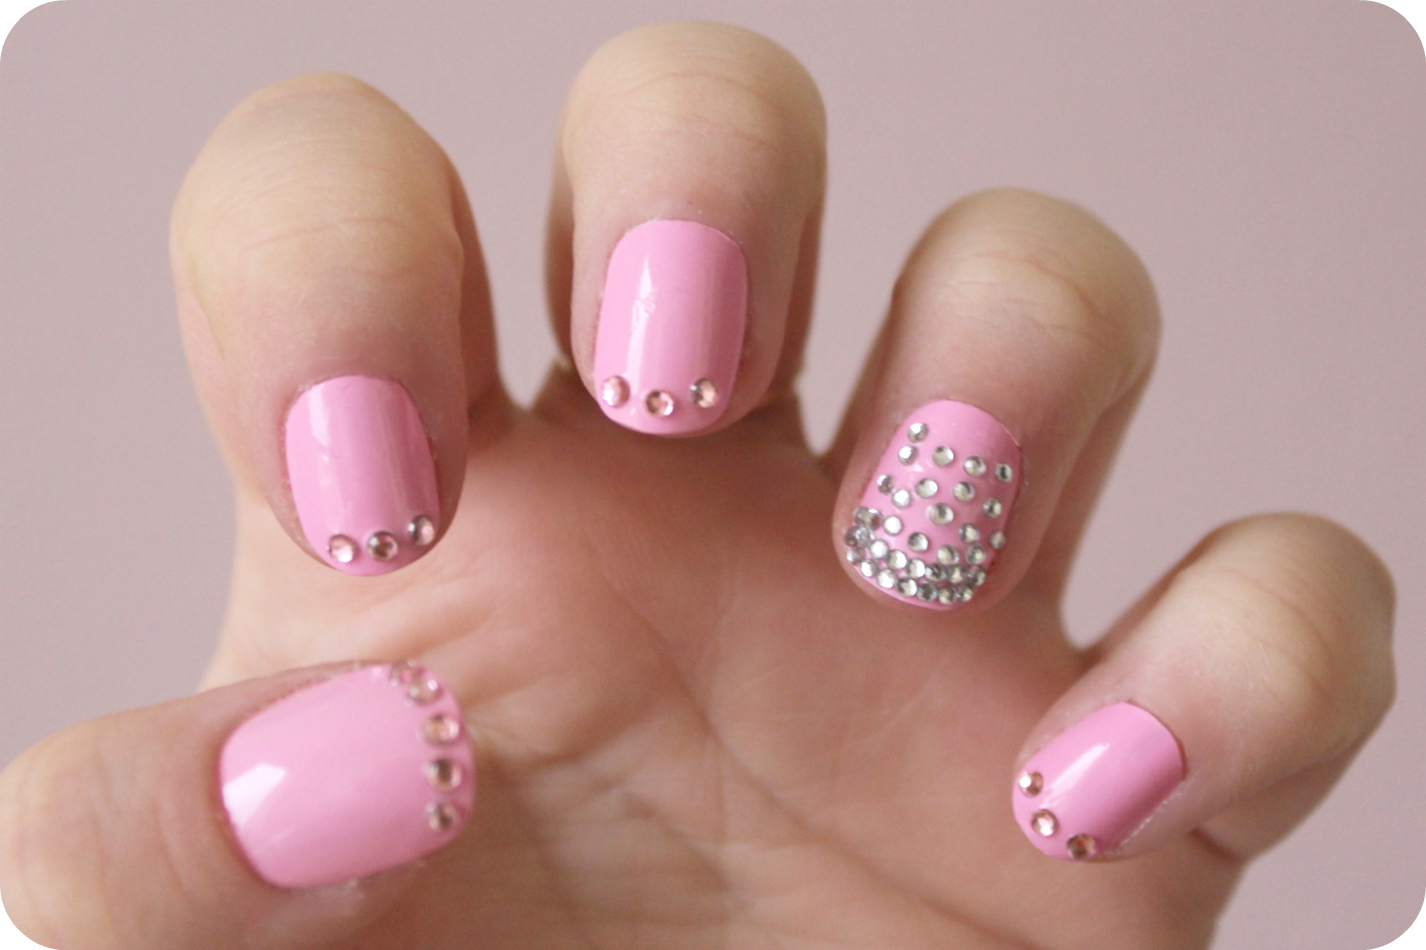 8. Bejeweled Nail Design - wide 4